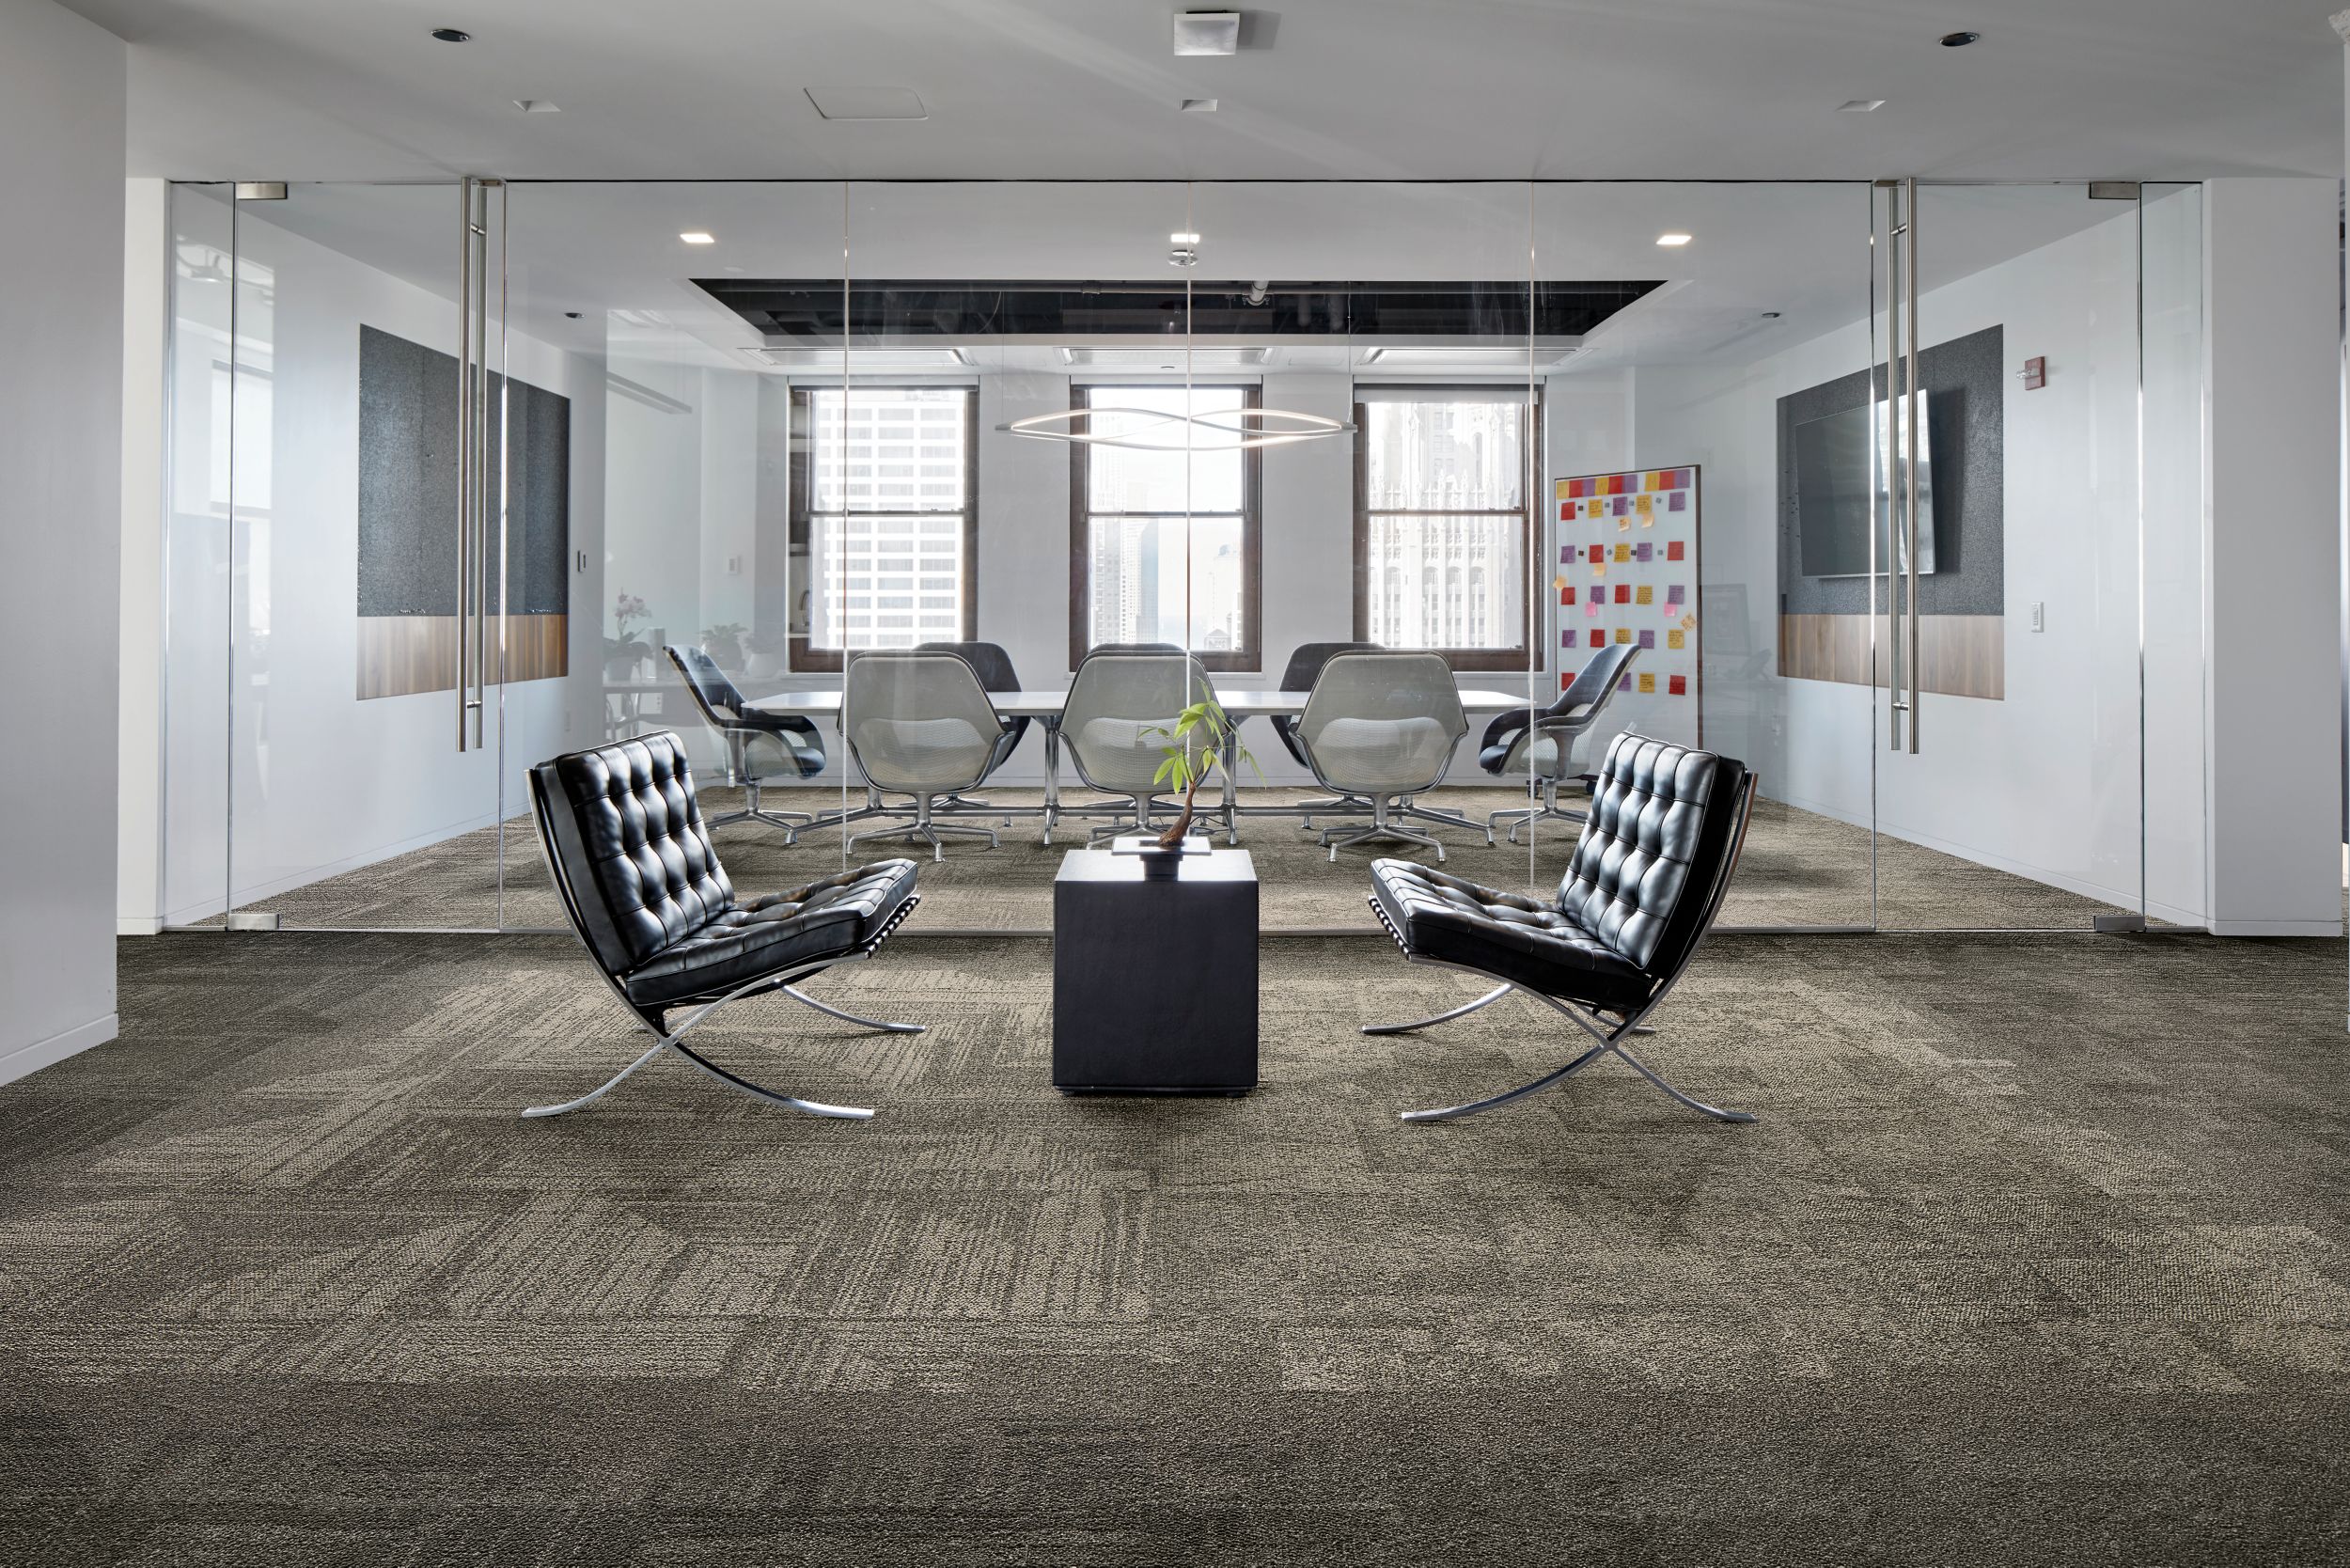 Interface Open Air 403 carpet tile in waiting area with meeting room in background numéro d’image 3